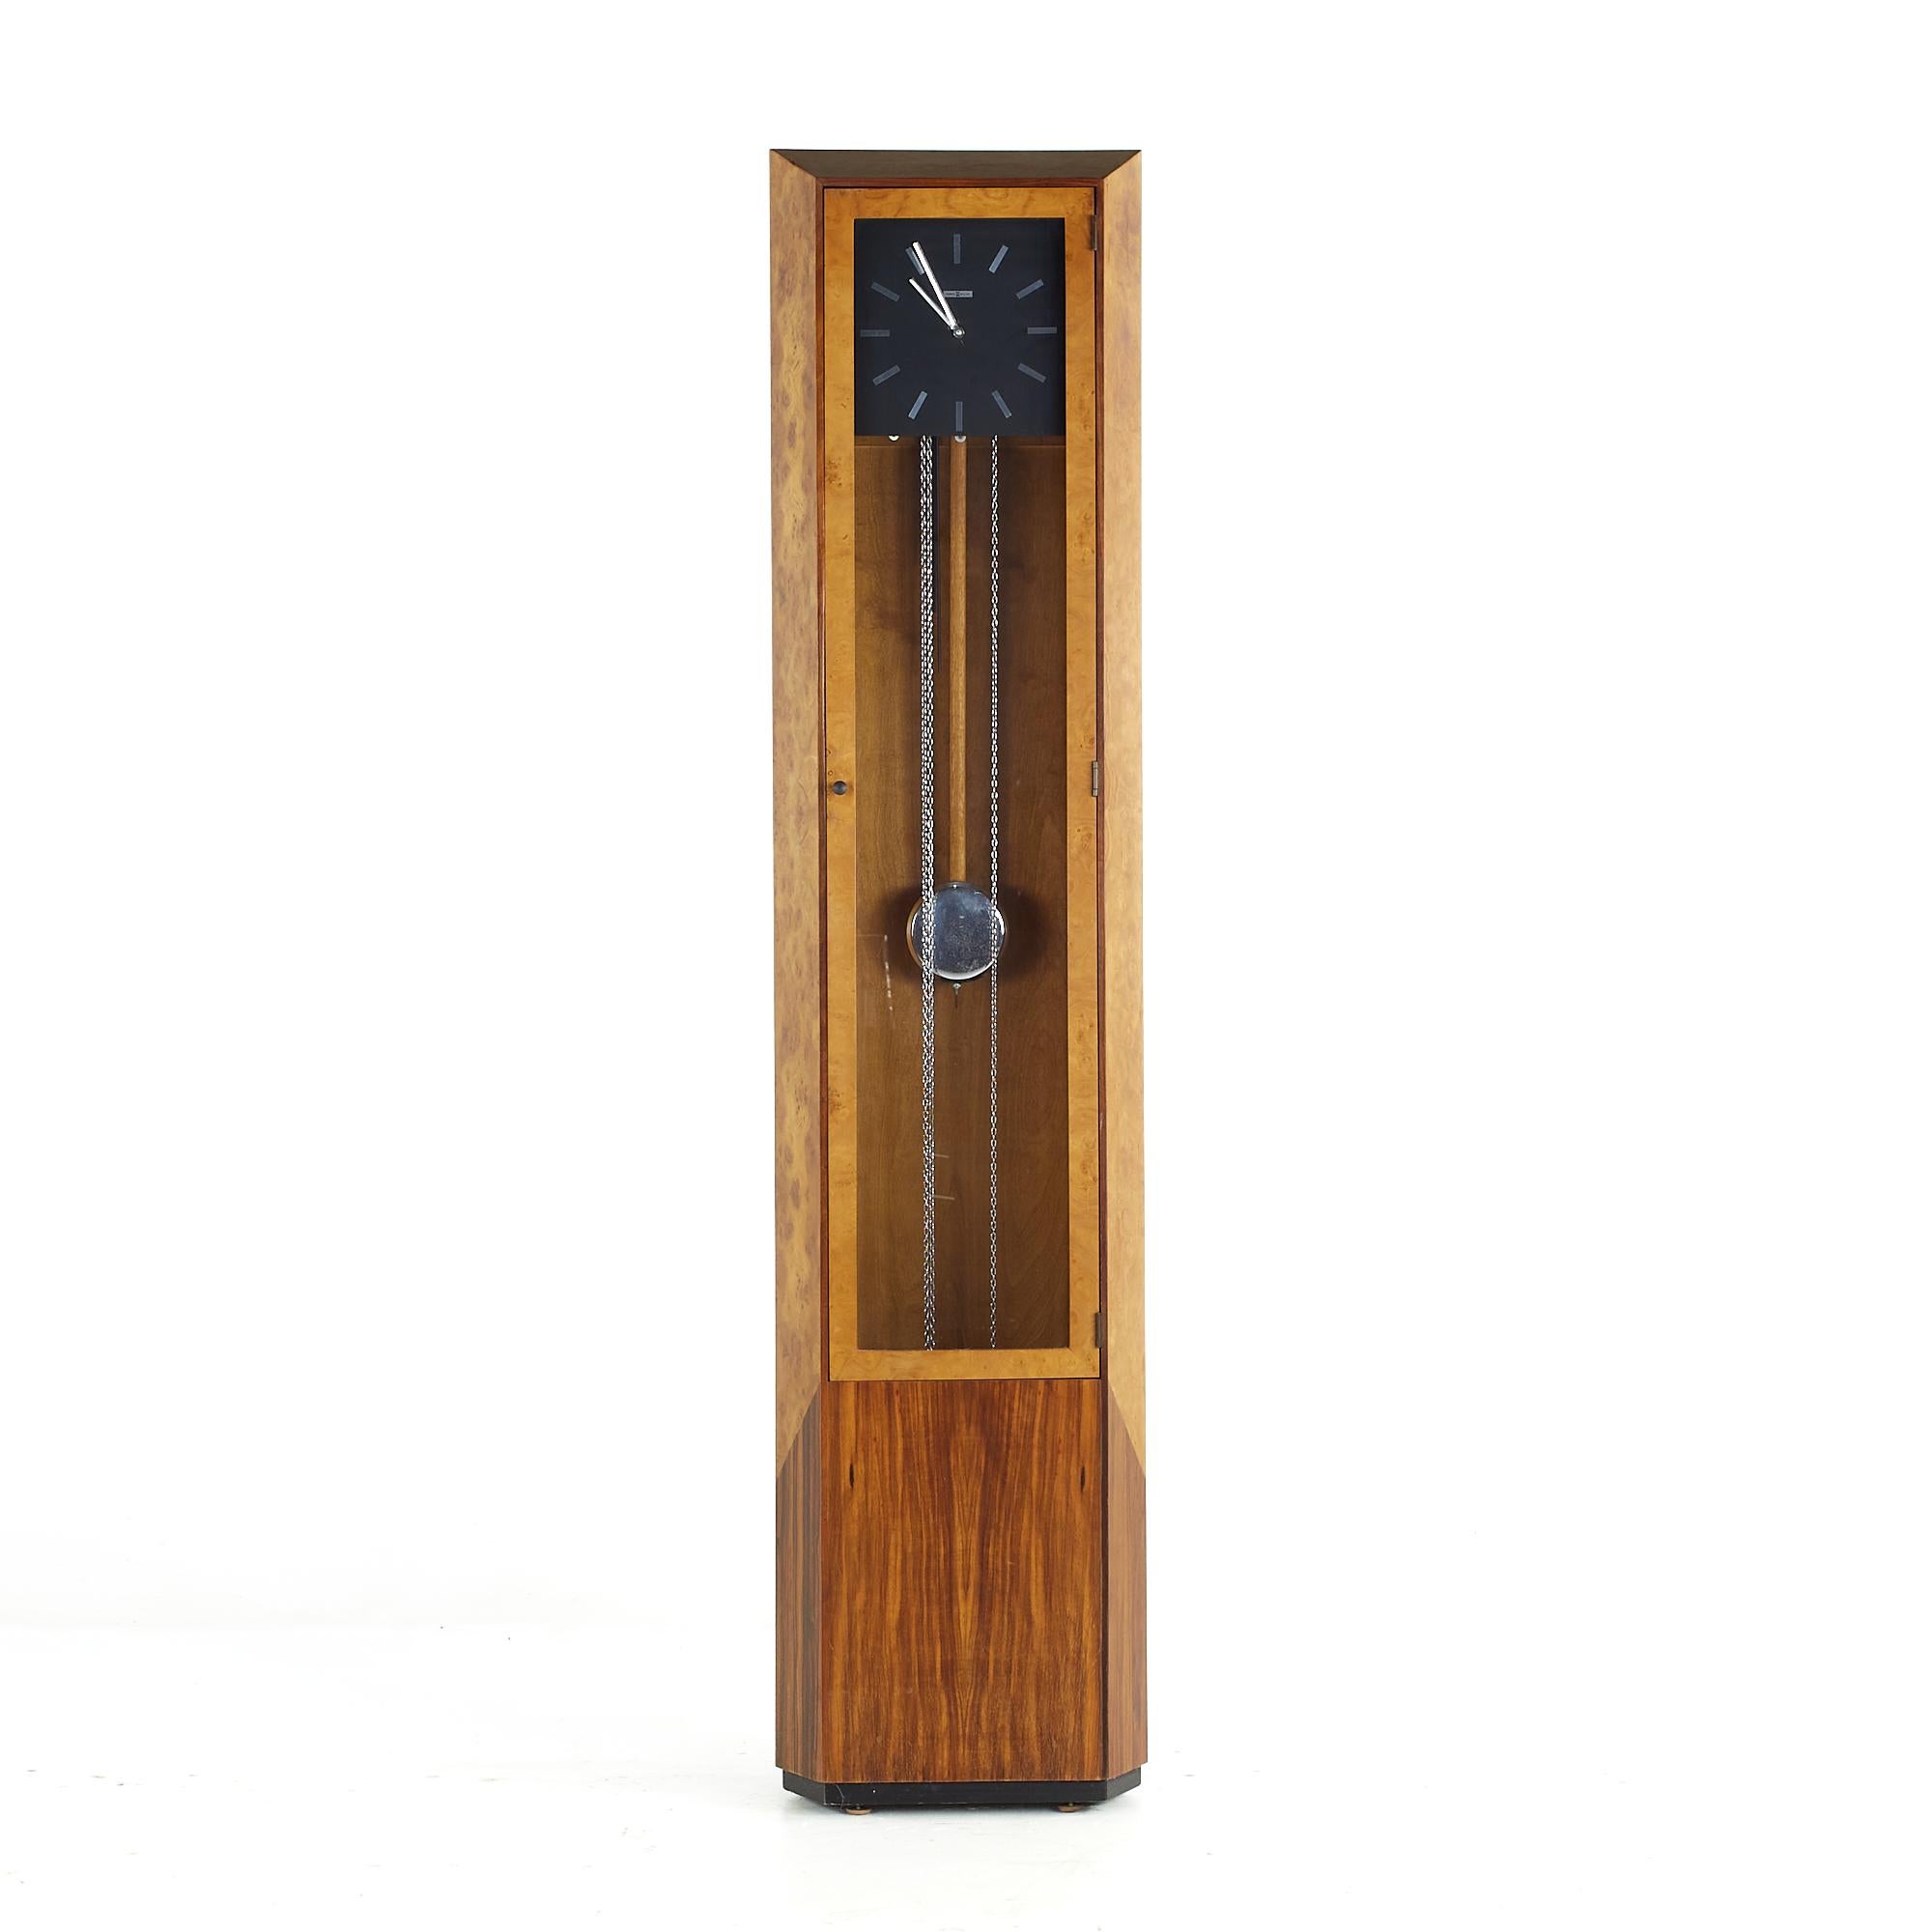 George Nelson Mid Century Burlwood and Rosewood Grandfather Clock

This clock measures: 16.5 wide x 9 deep x 72.5 inches high

We take our photos in a controlled lighting studio to show as much detail as possible. We do not photoshop out